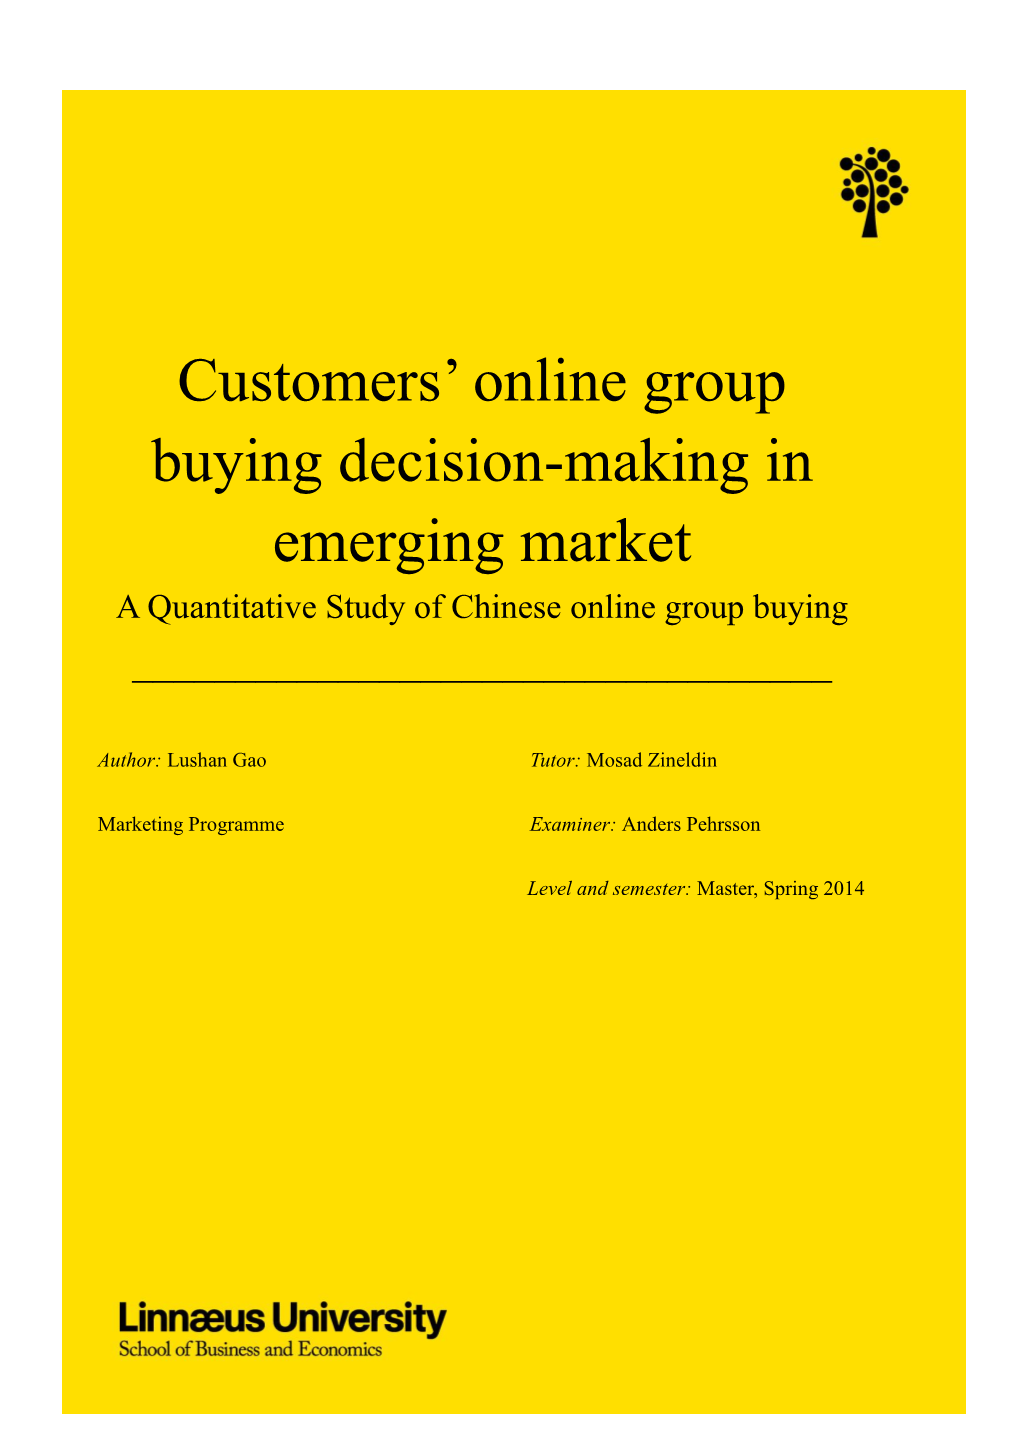 Customers' Online Group Buying Decision-Making In